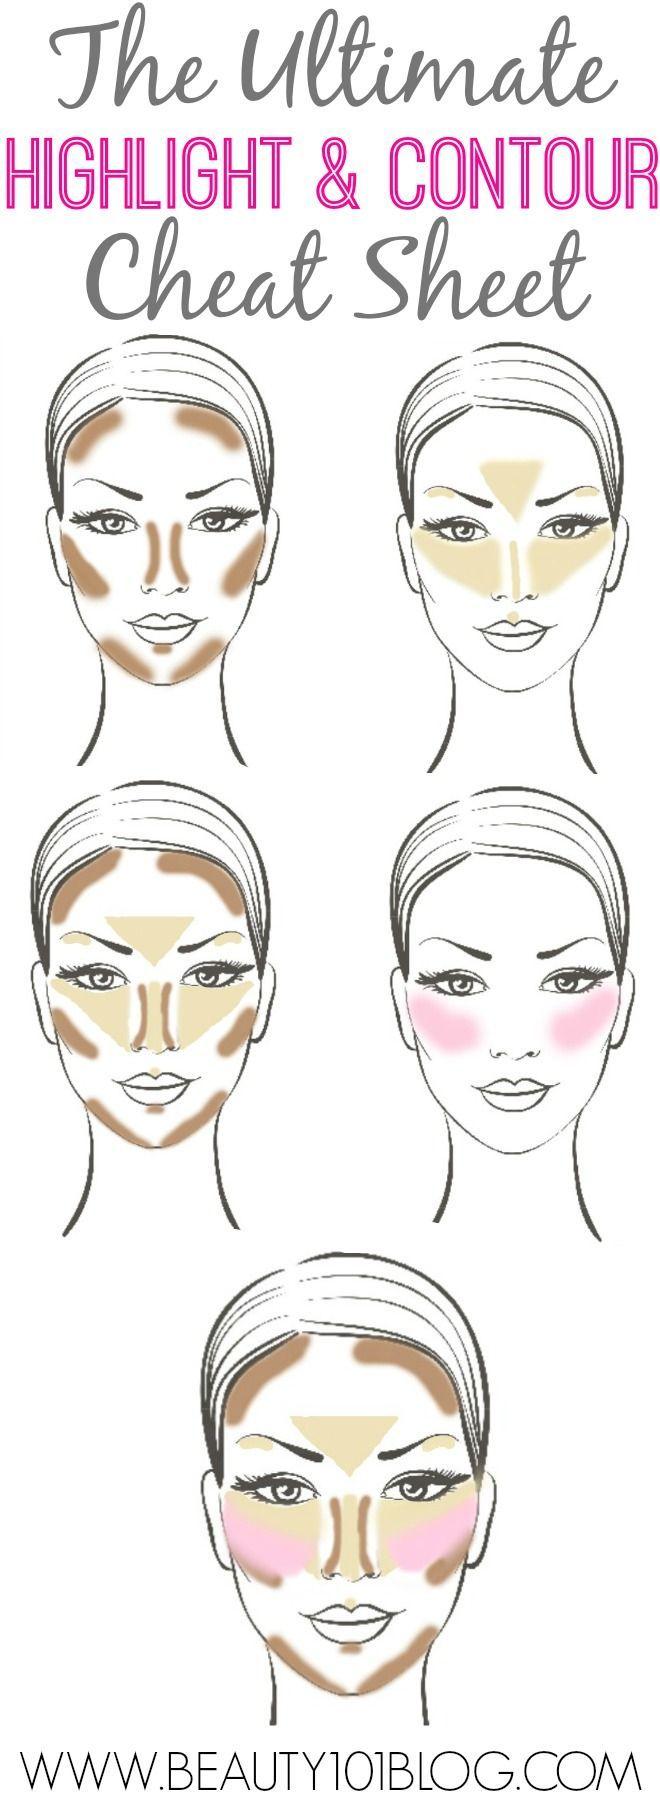 Mariage - The Ultimate Highlight & Contour Cheat Sheet!